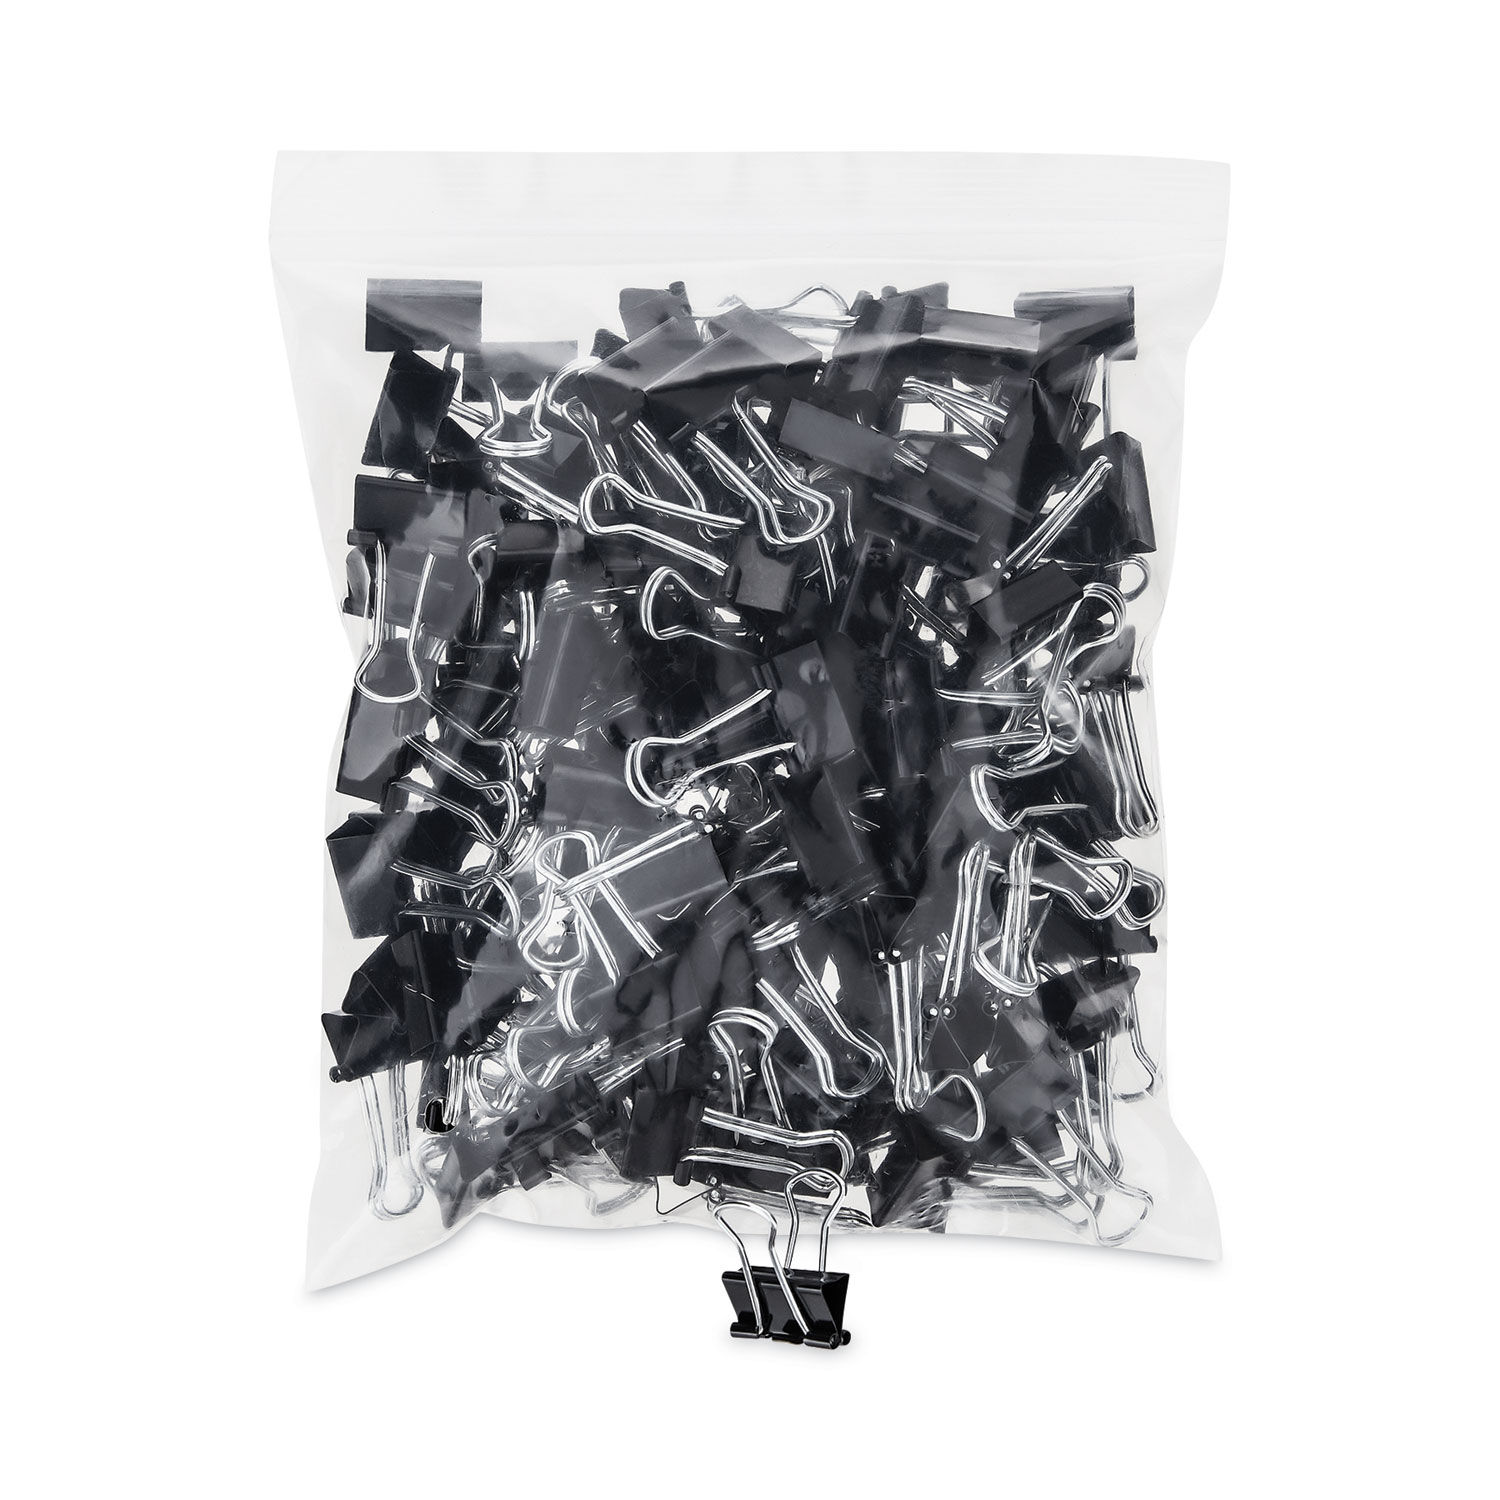 UNV10200 - Universal Small Binder Clips